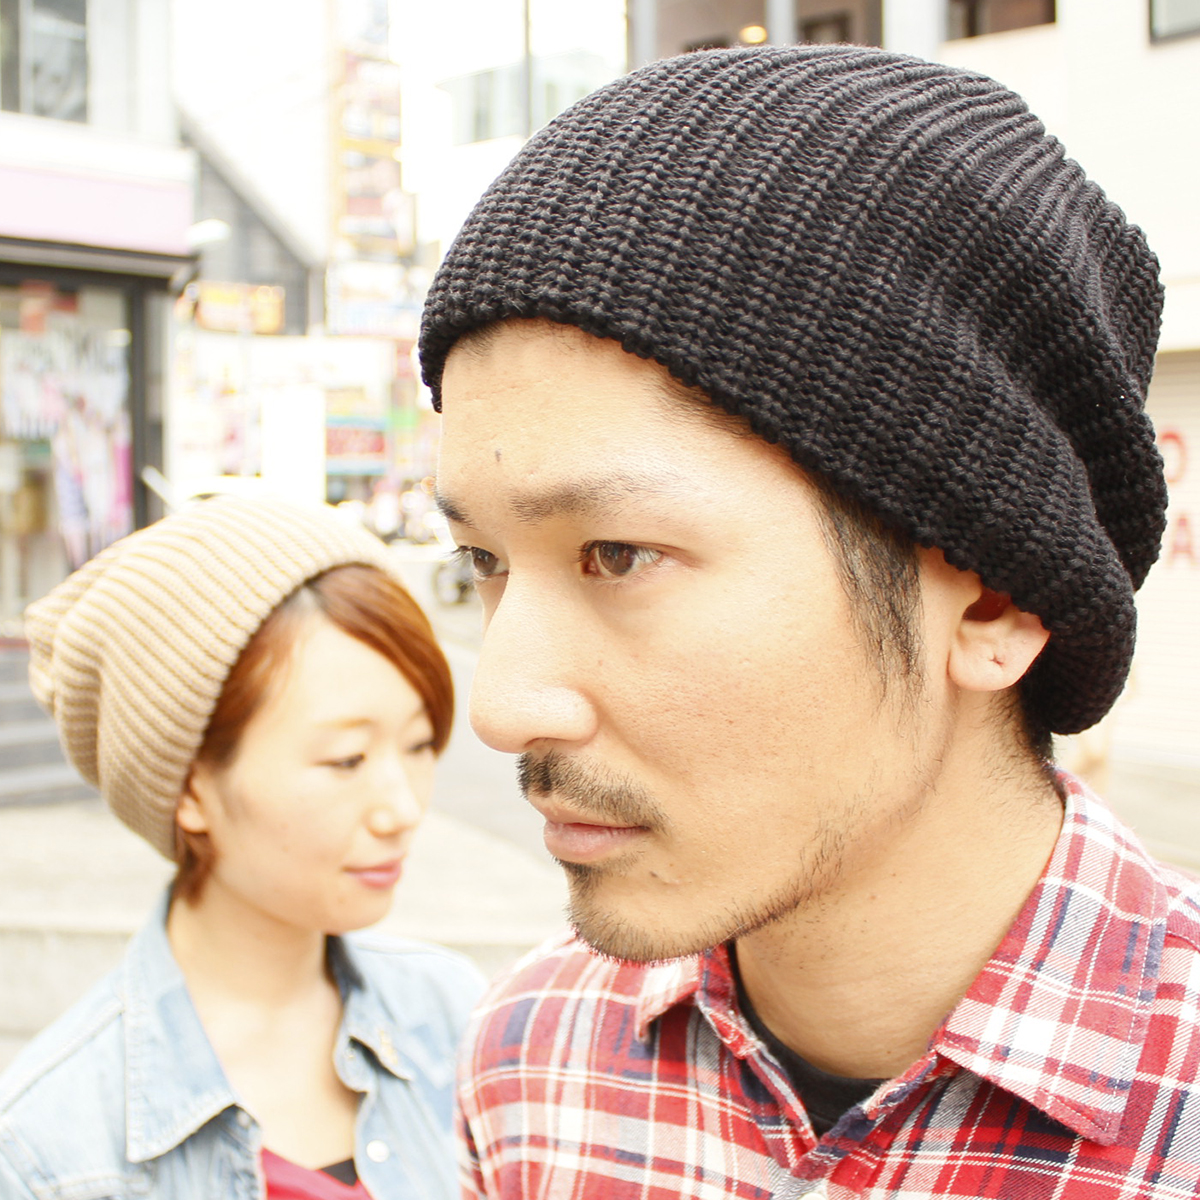 Hats and Caps River Up | Rakuten Global Market: Large simple knit 